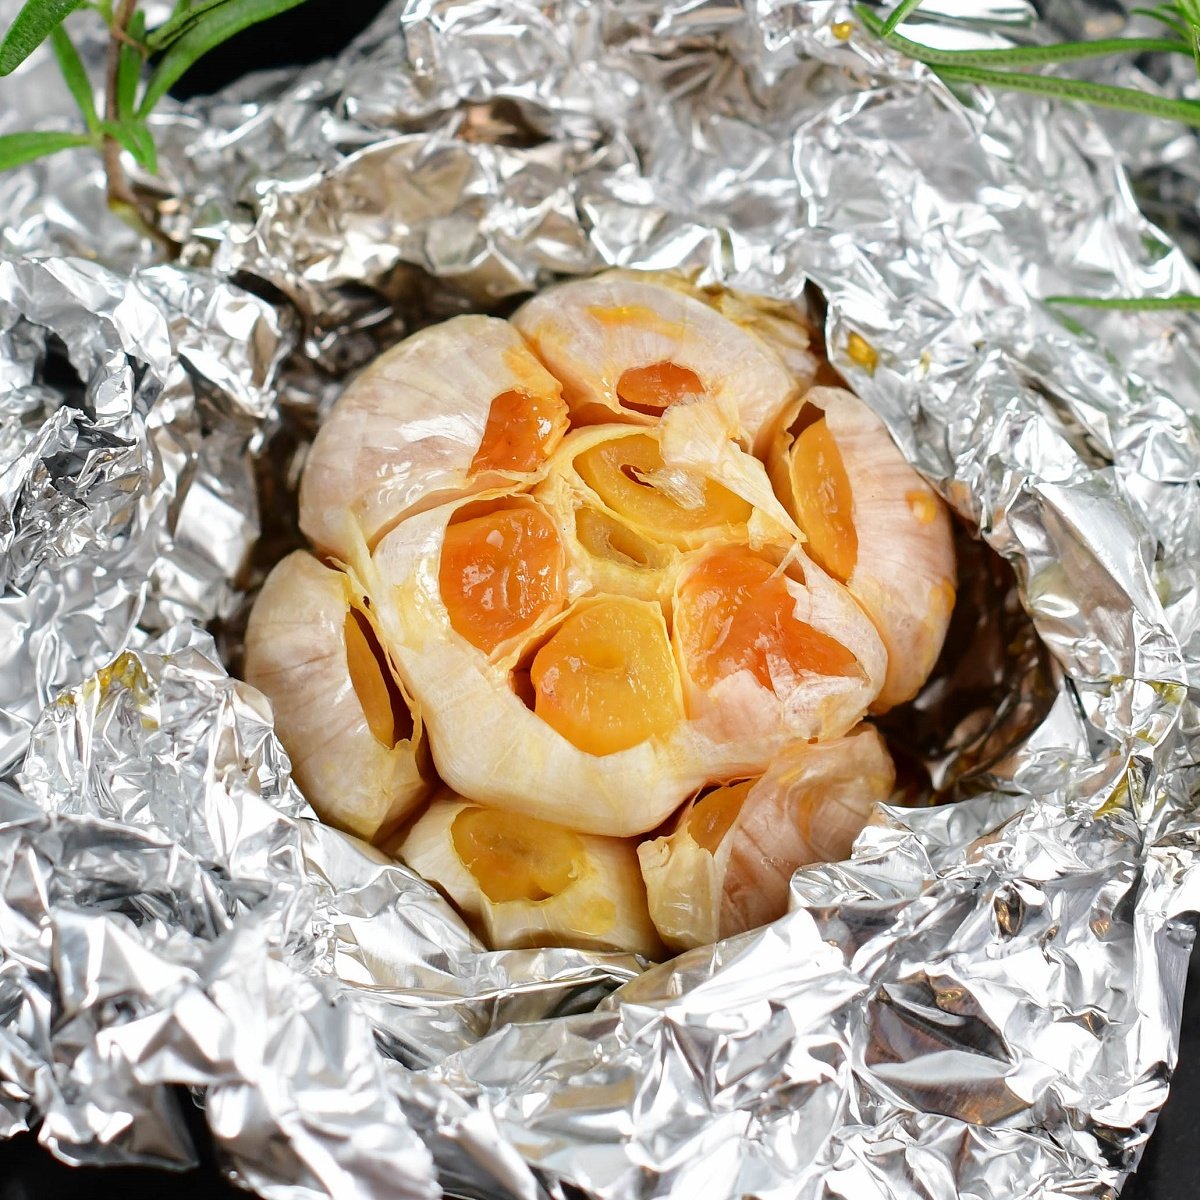 squared off image of roasted garlic in foil